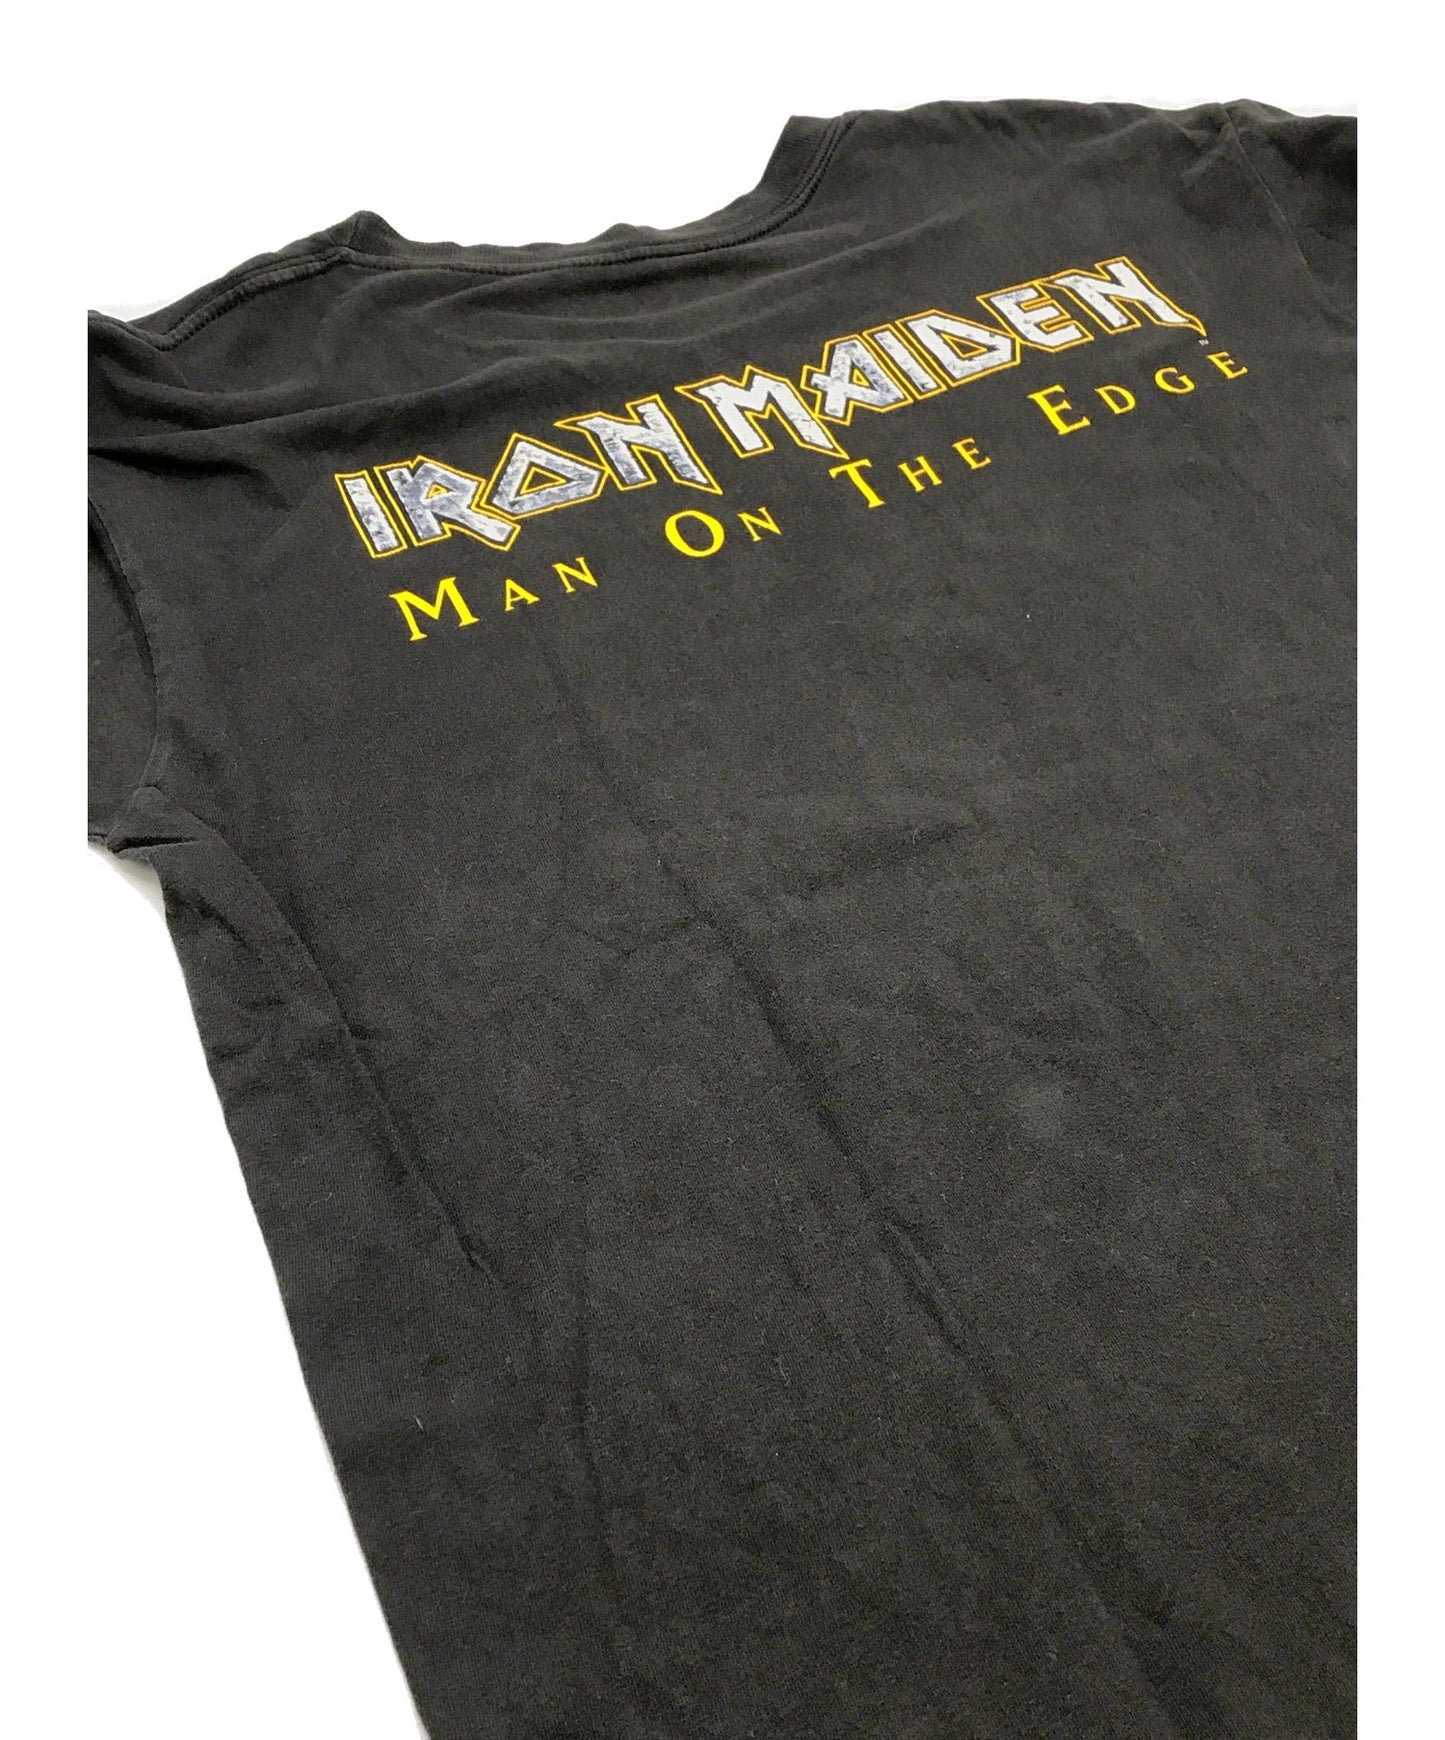 [Pre-owned] [Vintage Clothes] 90's Iron Maiden Band T-Shirt